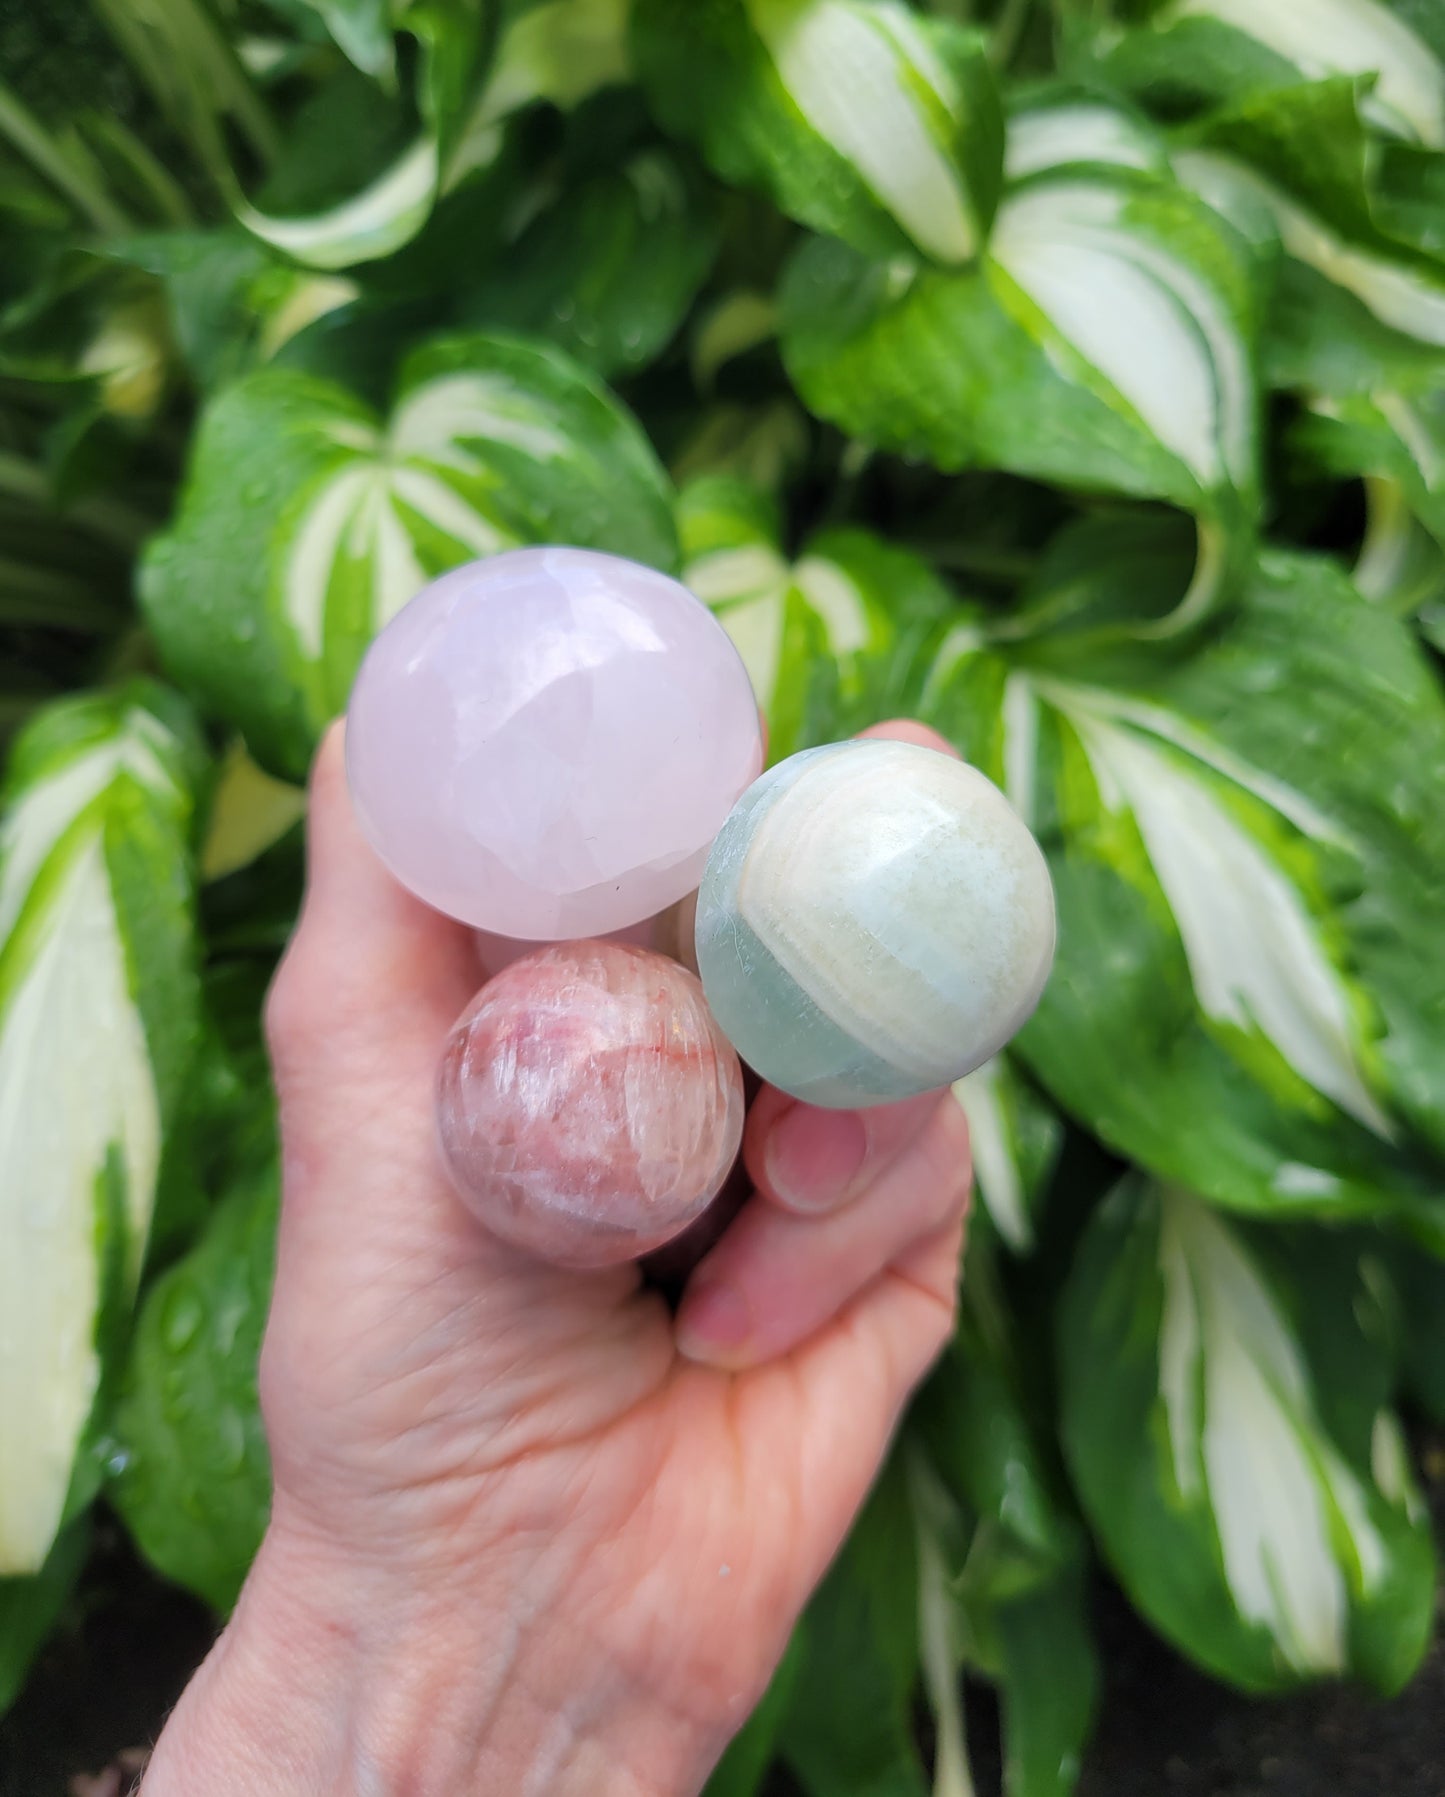 Mushroom SET Carved and Polished in Pakistan - Red Calcite, Green Calcite, Pink Calcite (Pink: 1 5/8 X H 2 1/4 inches, red: 1 1/4 X H 2 1/4 inches, green: 1 1/4 X H 2 inches)